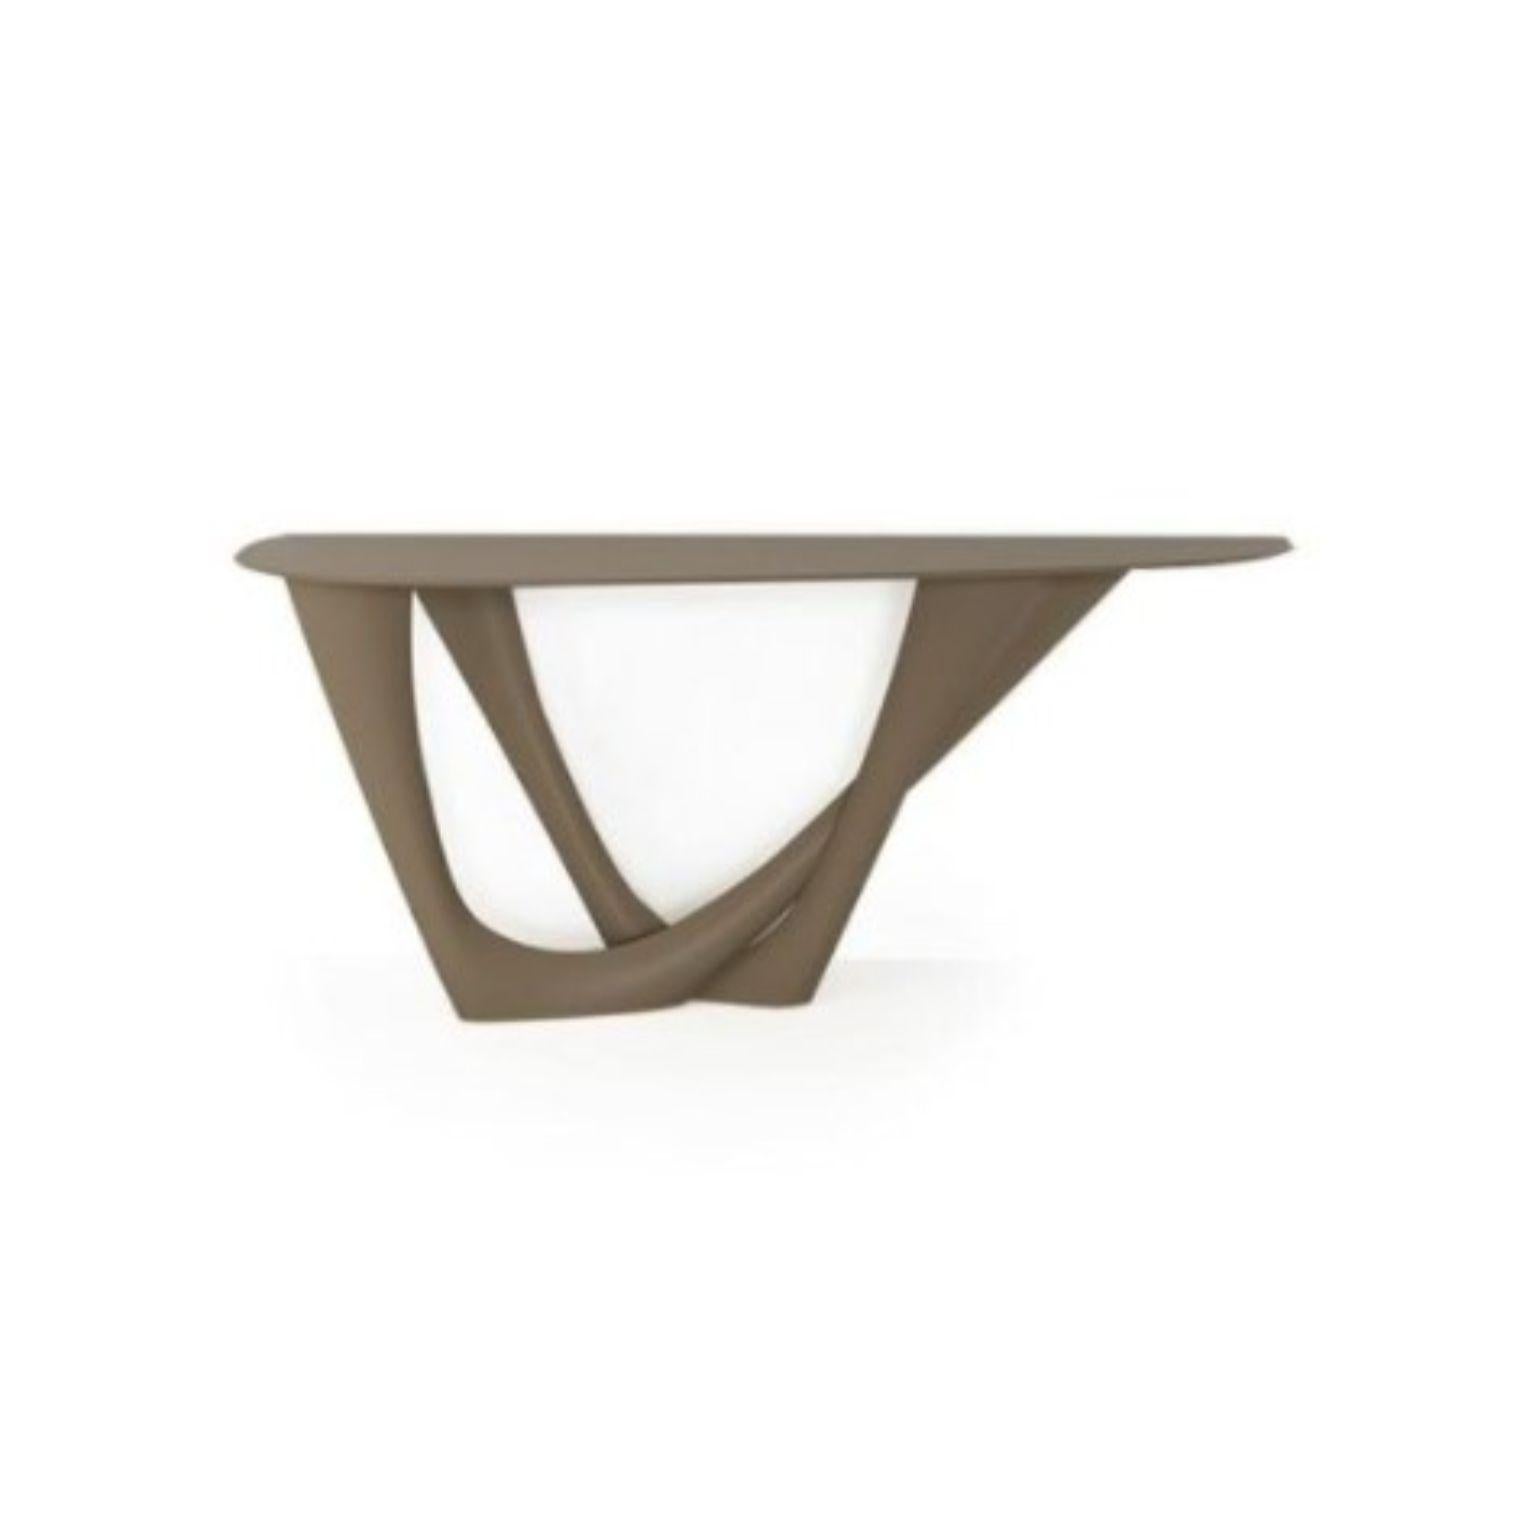 Beige Grey G-Console Duo steel base and top by Zieta
Dimensions: D 56 x W 168 x H 75 cm 
Material: Steel.
Also available in different colors and dimensions. 

G-Console is another bionic object in our collection. Created for smaller spaces, it gives